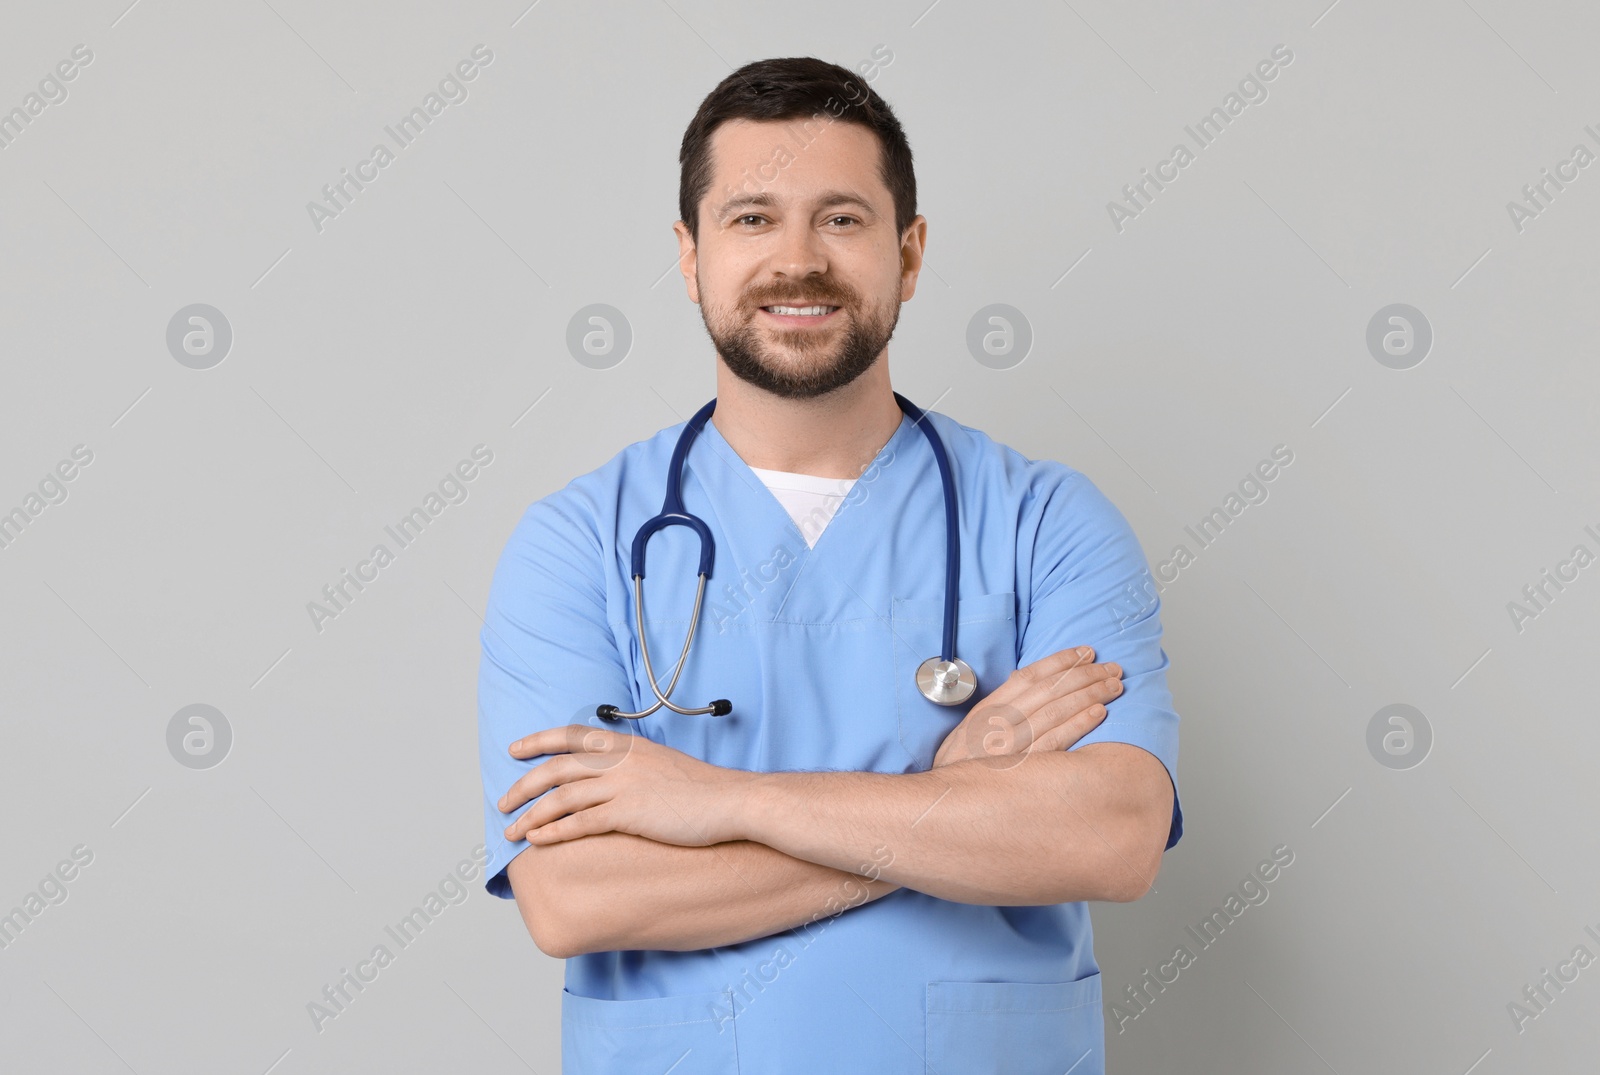 Photo of Portrait of smiling doctor on light grey background